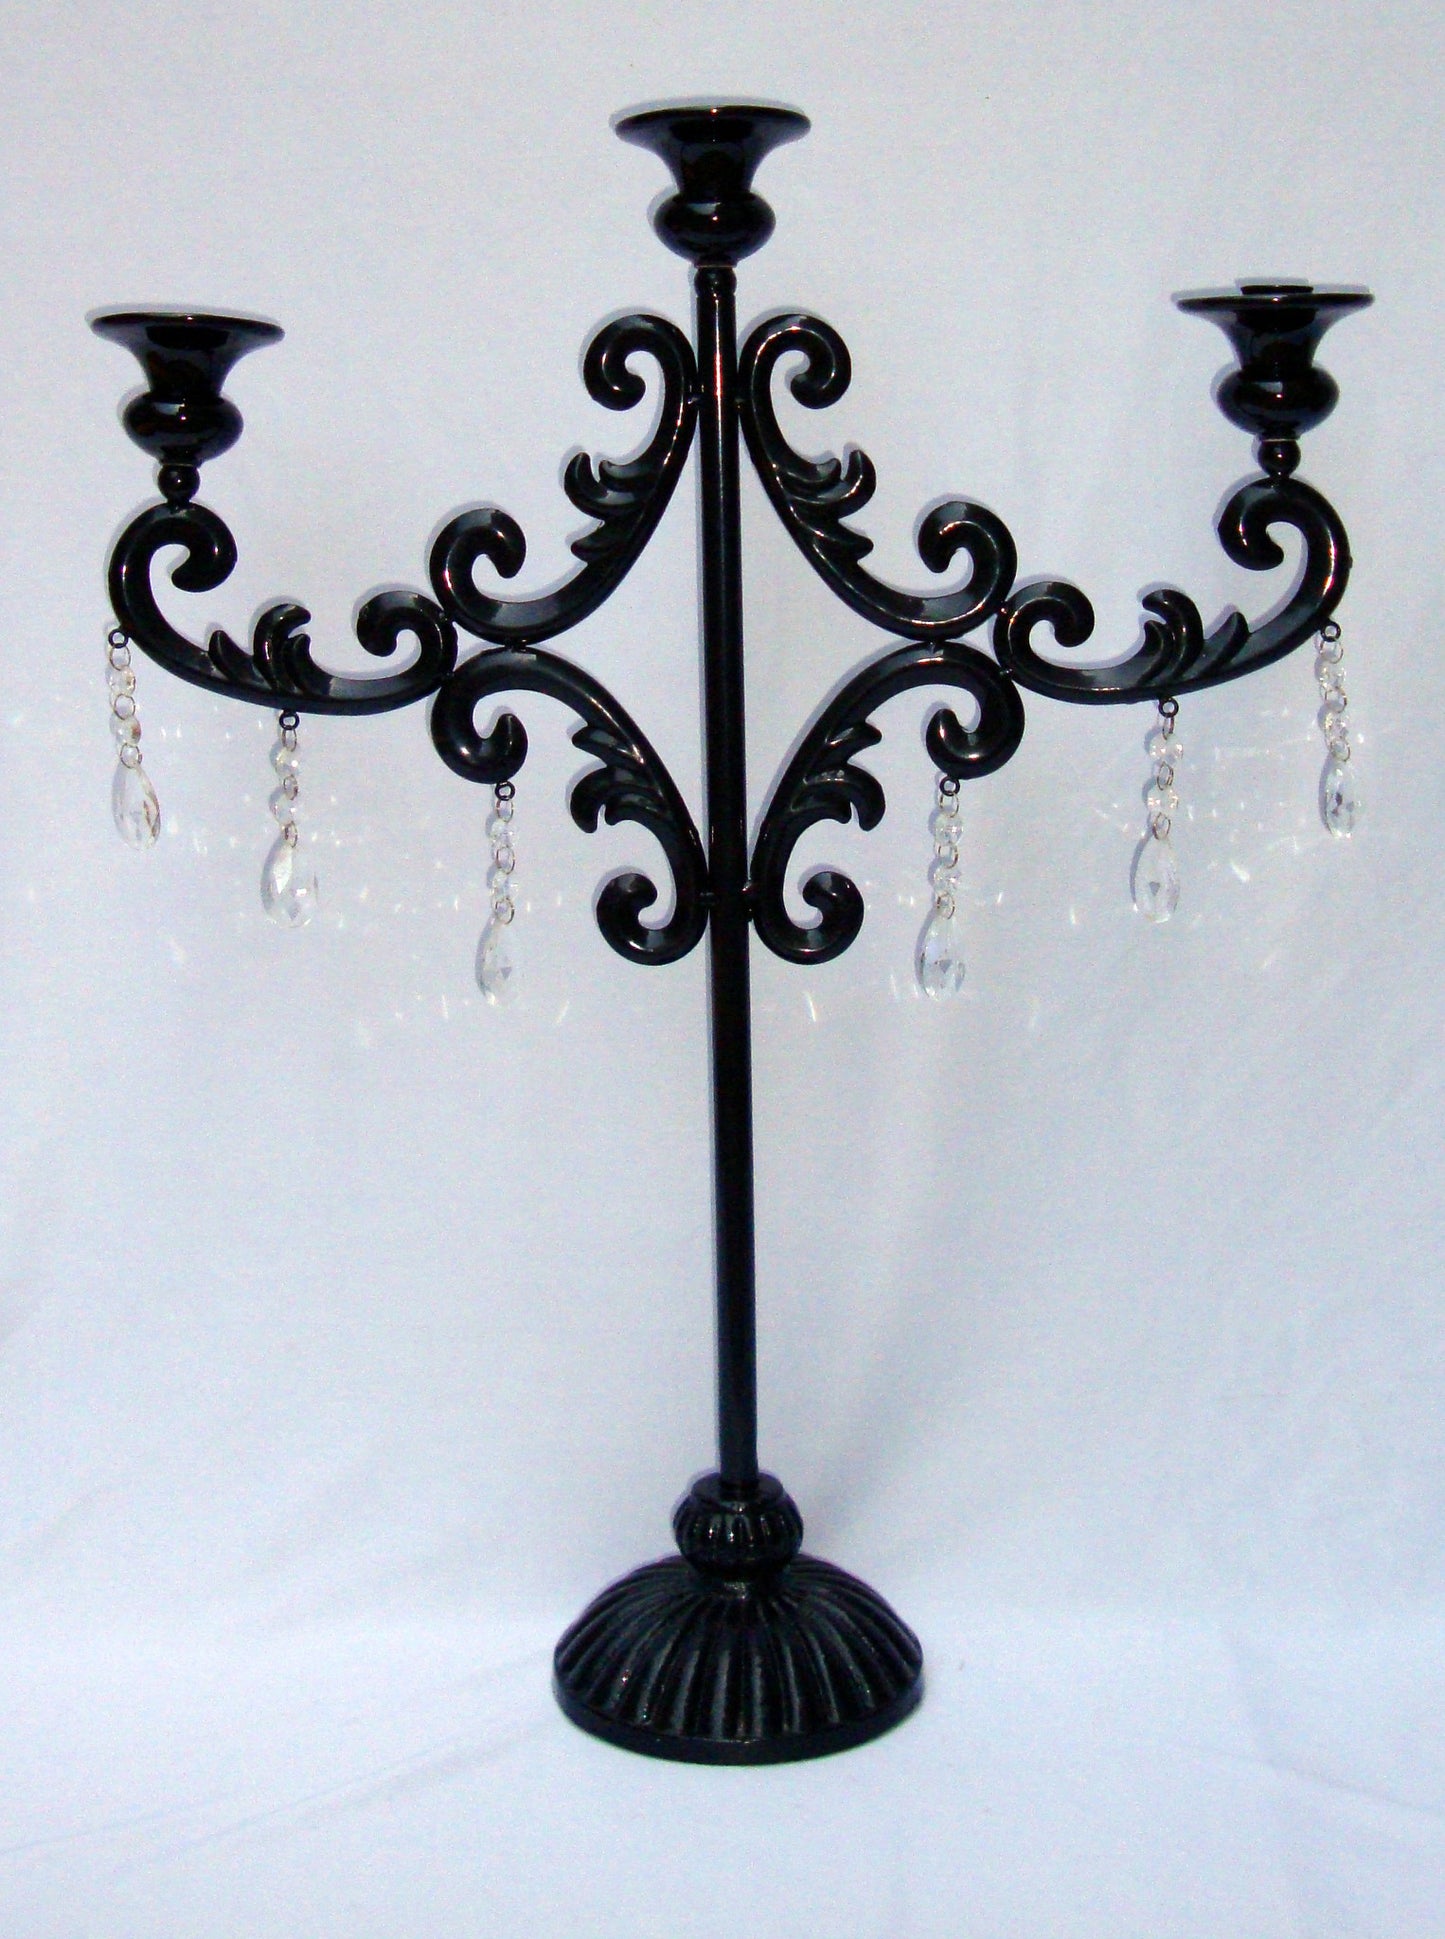 [SOLD] Large Gothic Deco Black Metal Crystal Candleabra